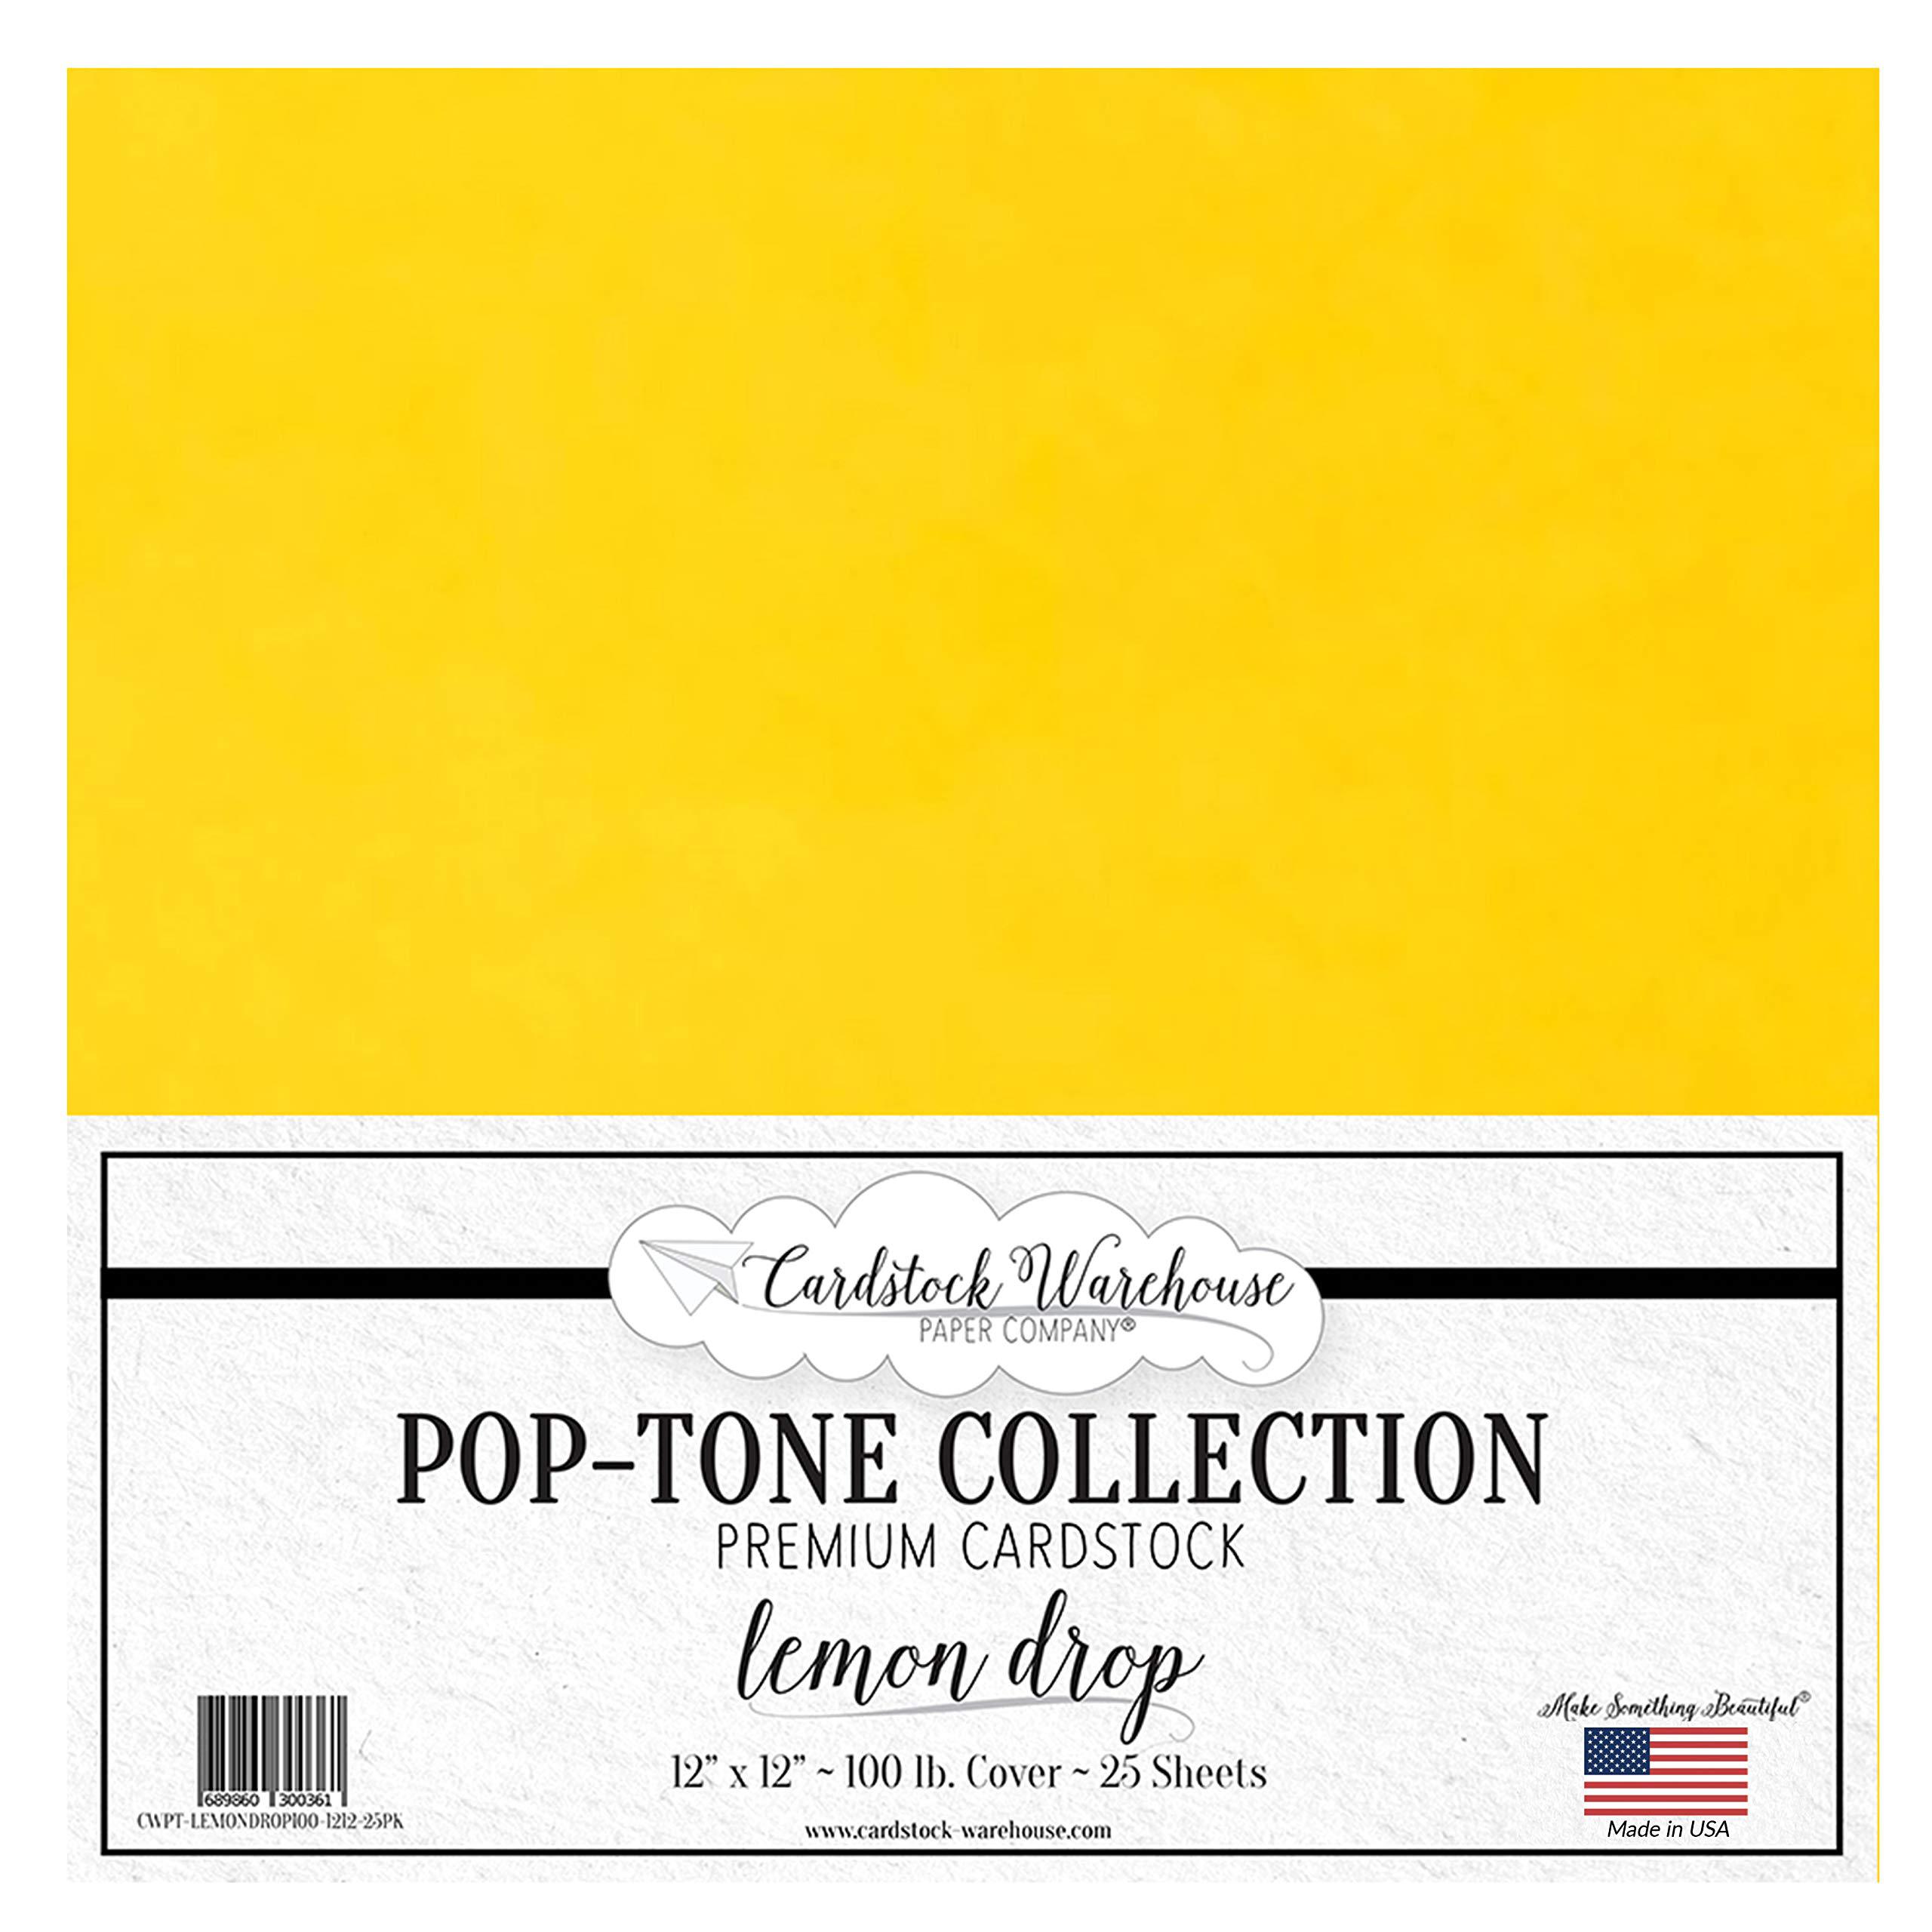 Lemon Drop Yellow Cardstock Paper - 12 x 12 inch 100 lb. Heavyweight Cover - 25 Sheets from Cardstock Warehouse